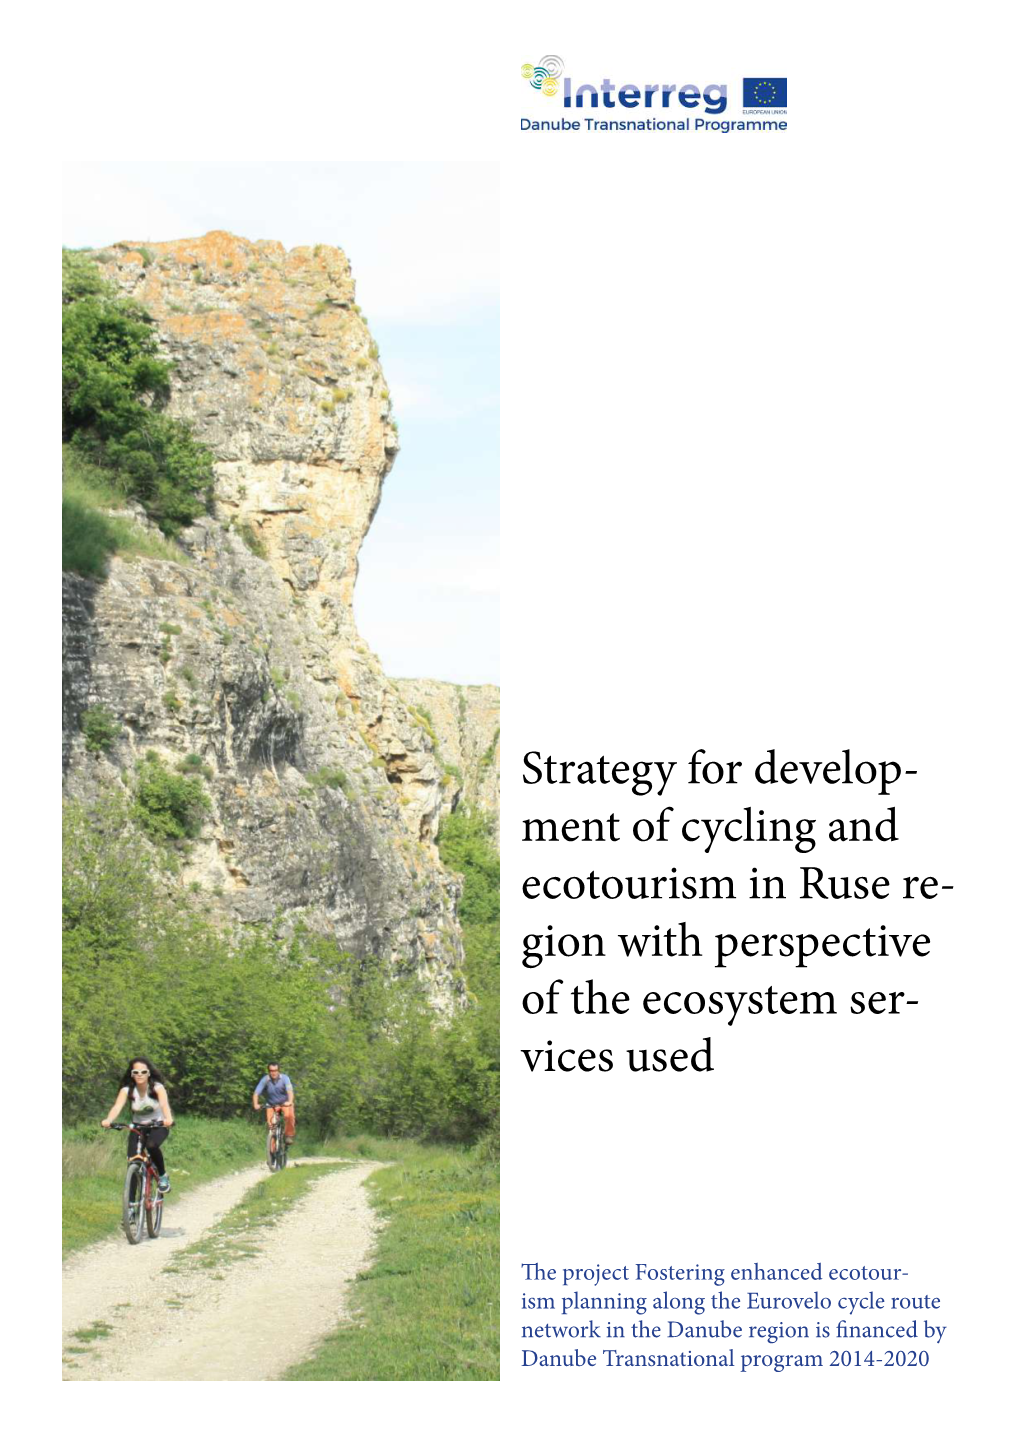 Ment of Cycling and Ecotourism in Ruse Re- Gion with Perspective of the Ecosystem Ser- Vices Used